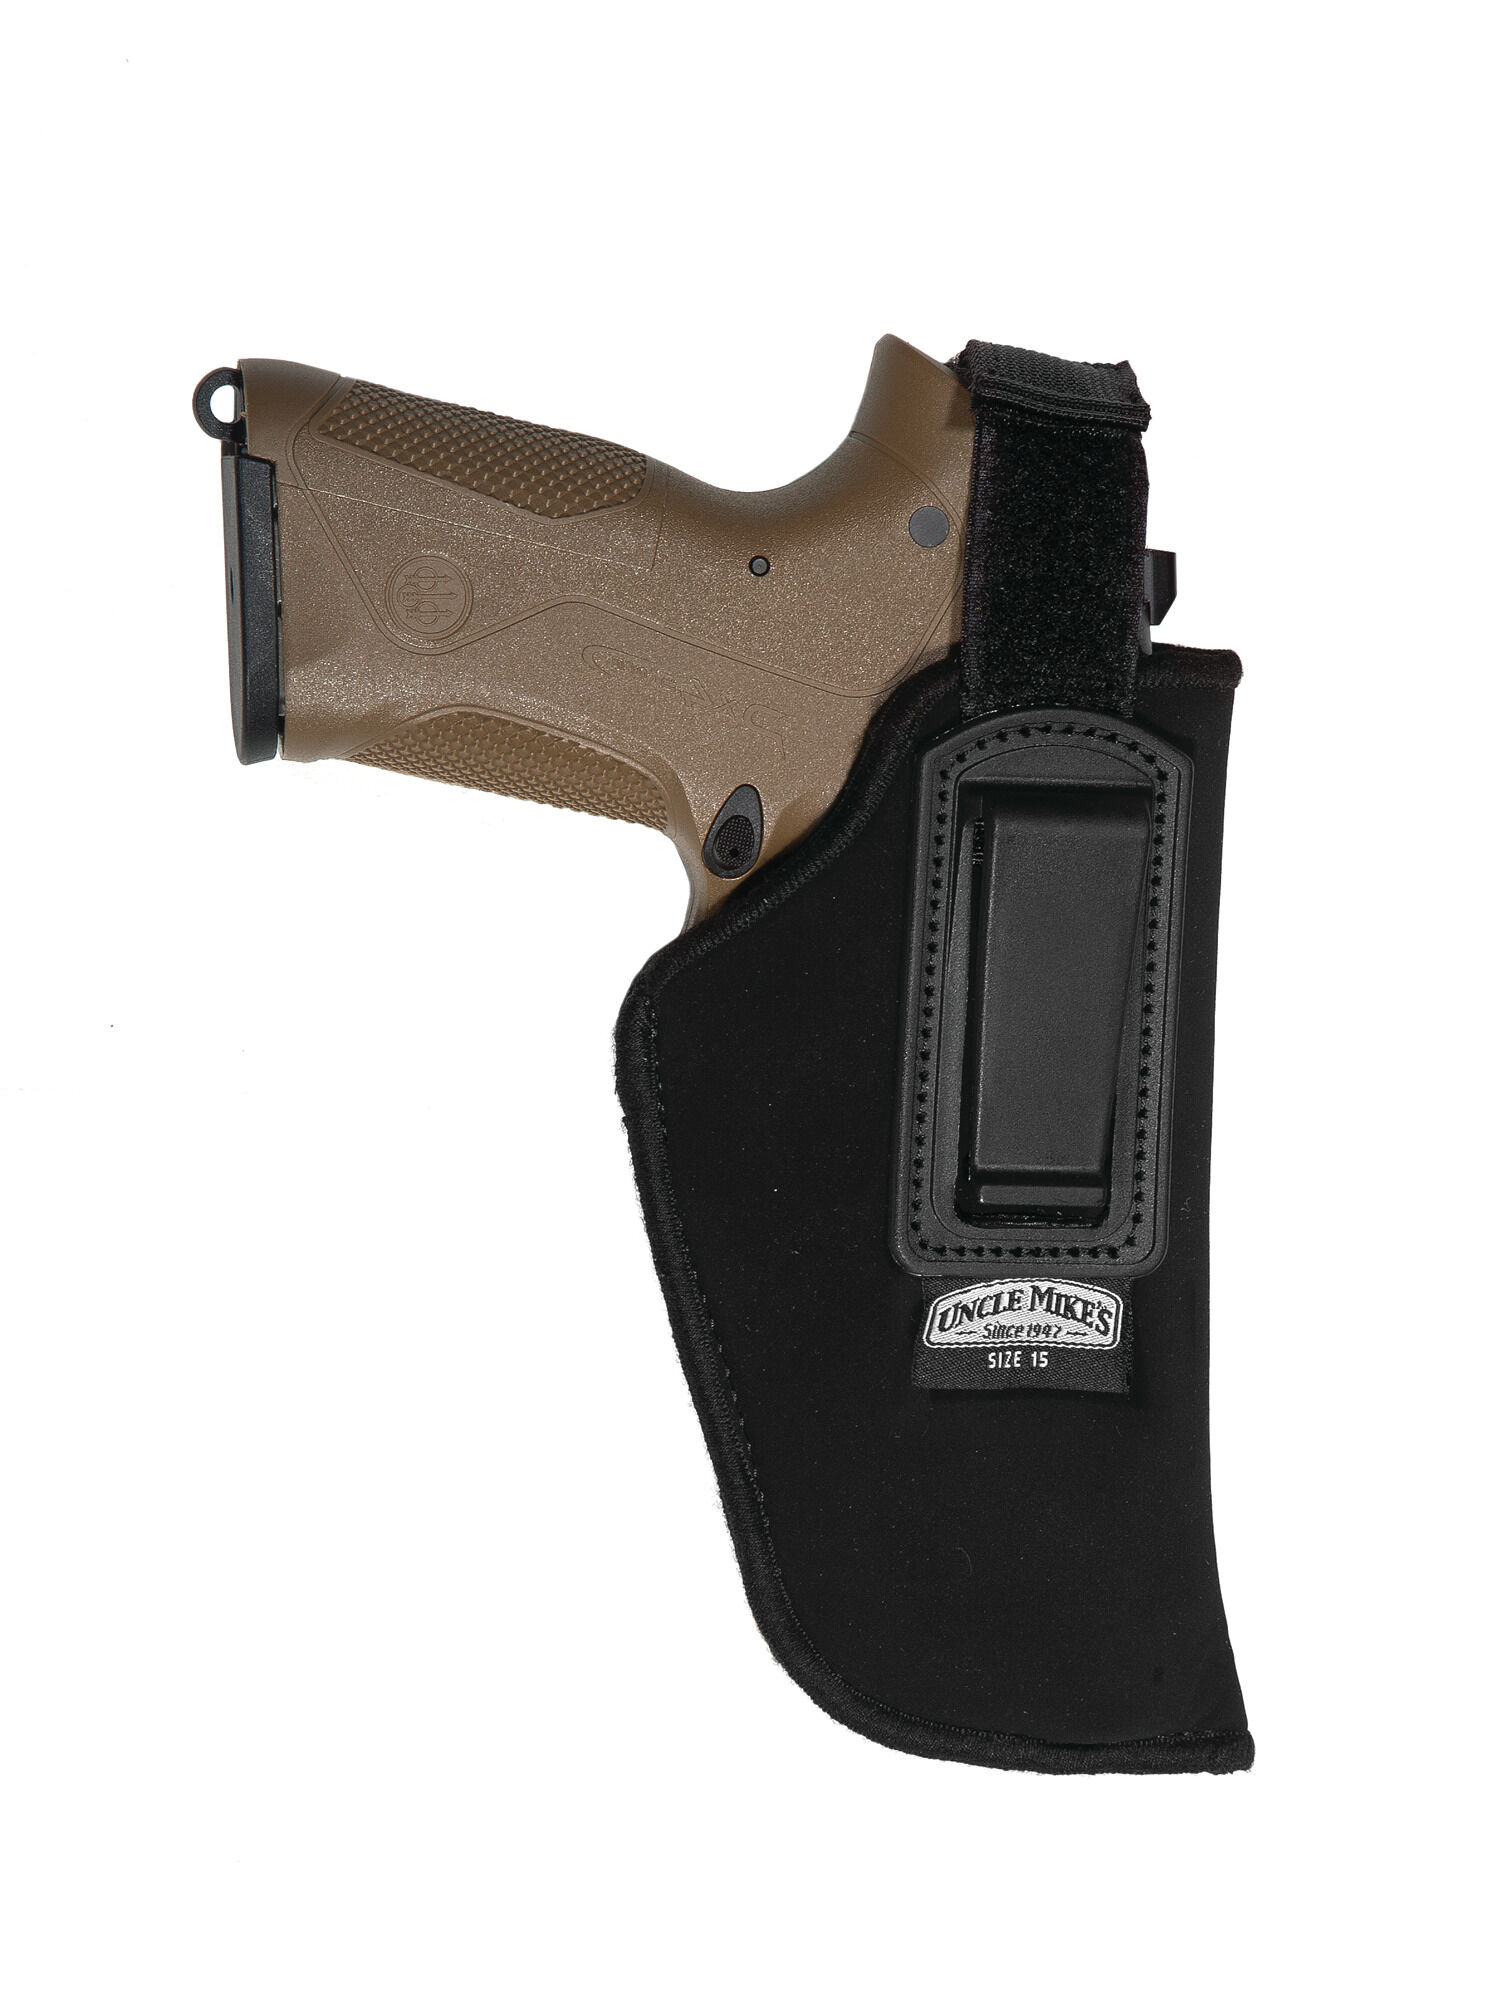 Buy Inside-the-Pant Holster w/Retention Strap And More | Uncle Mikes